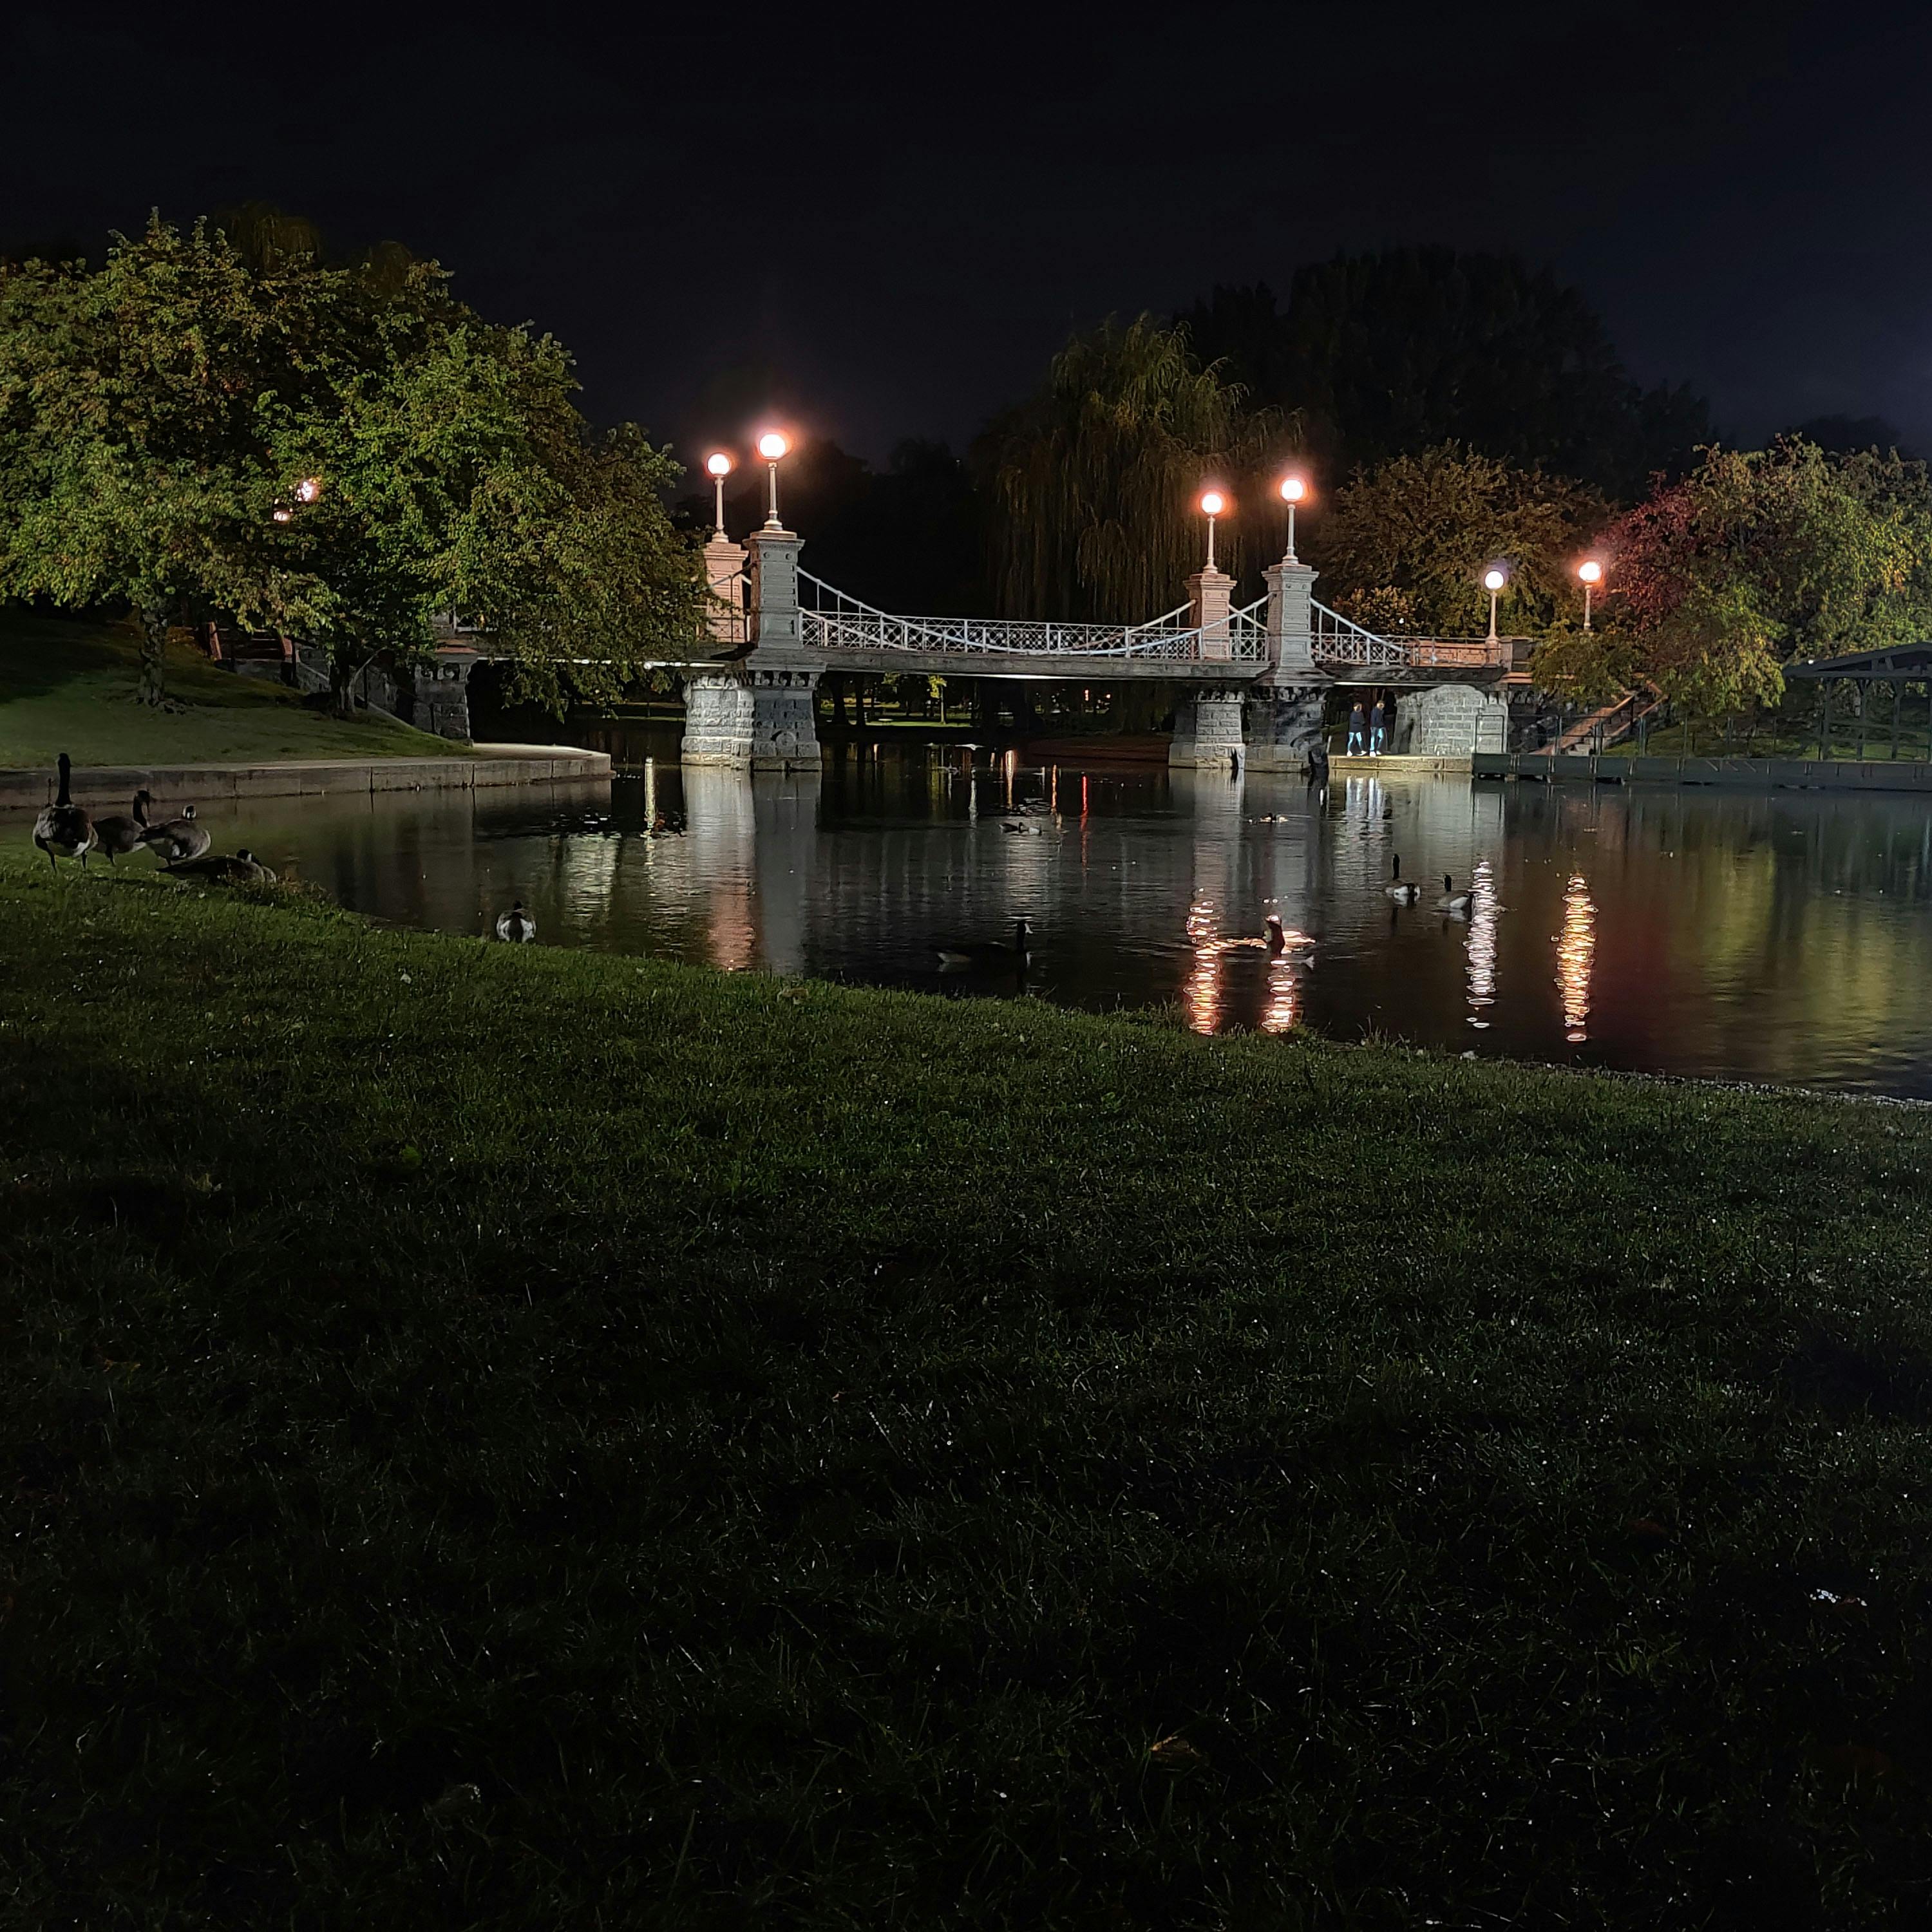 the boston common bridge, viewed over the pond at night